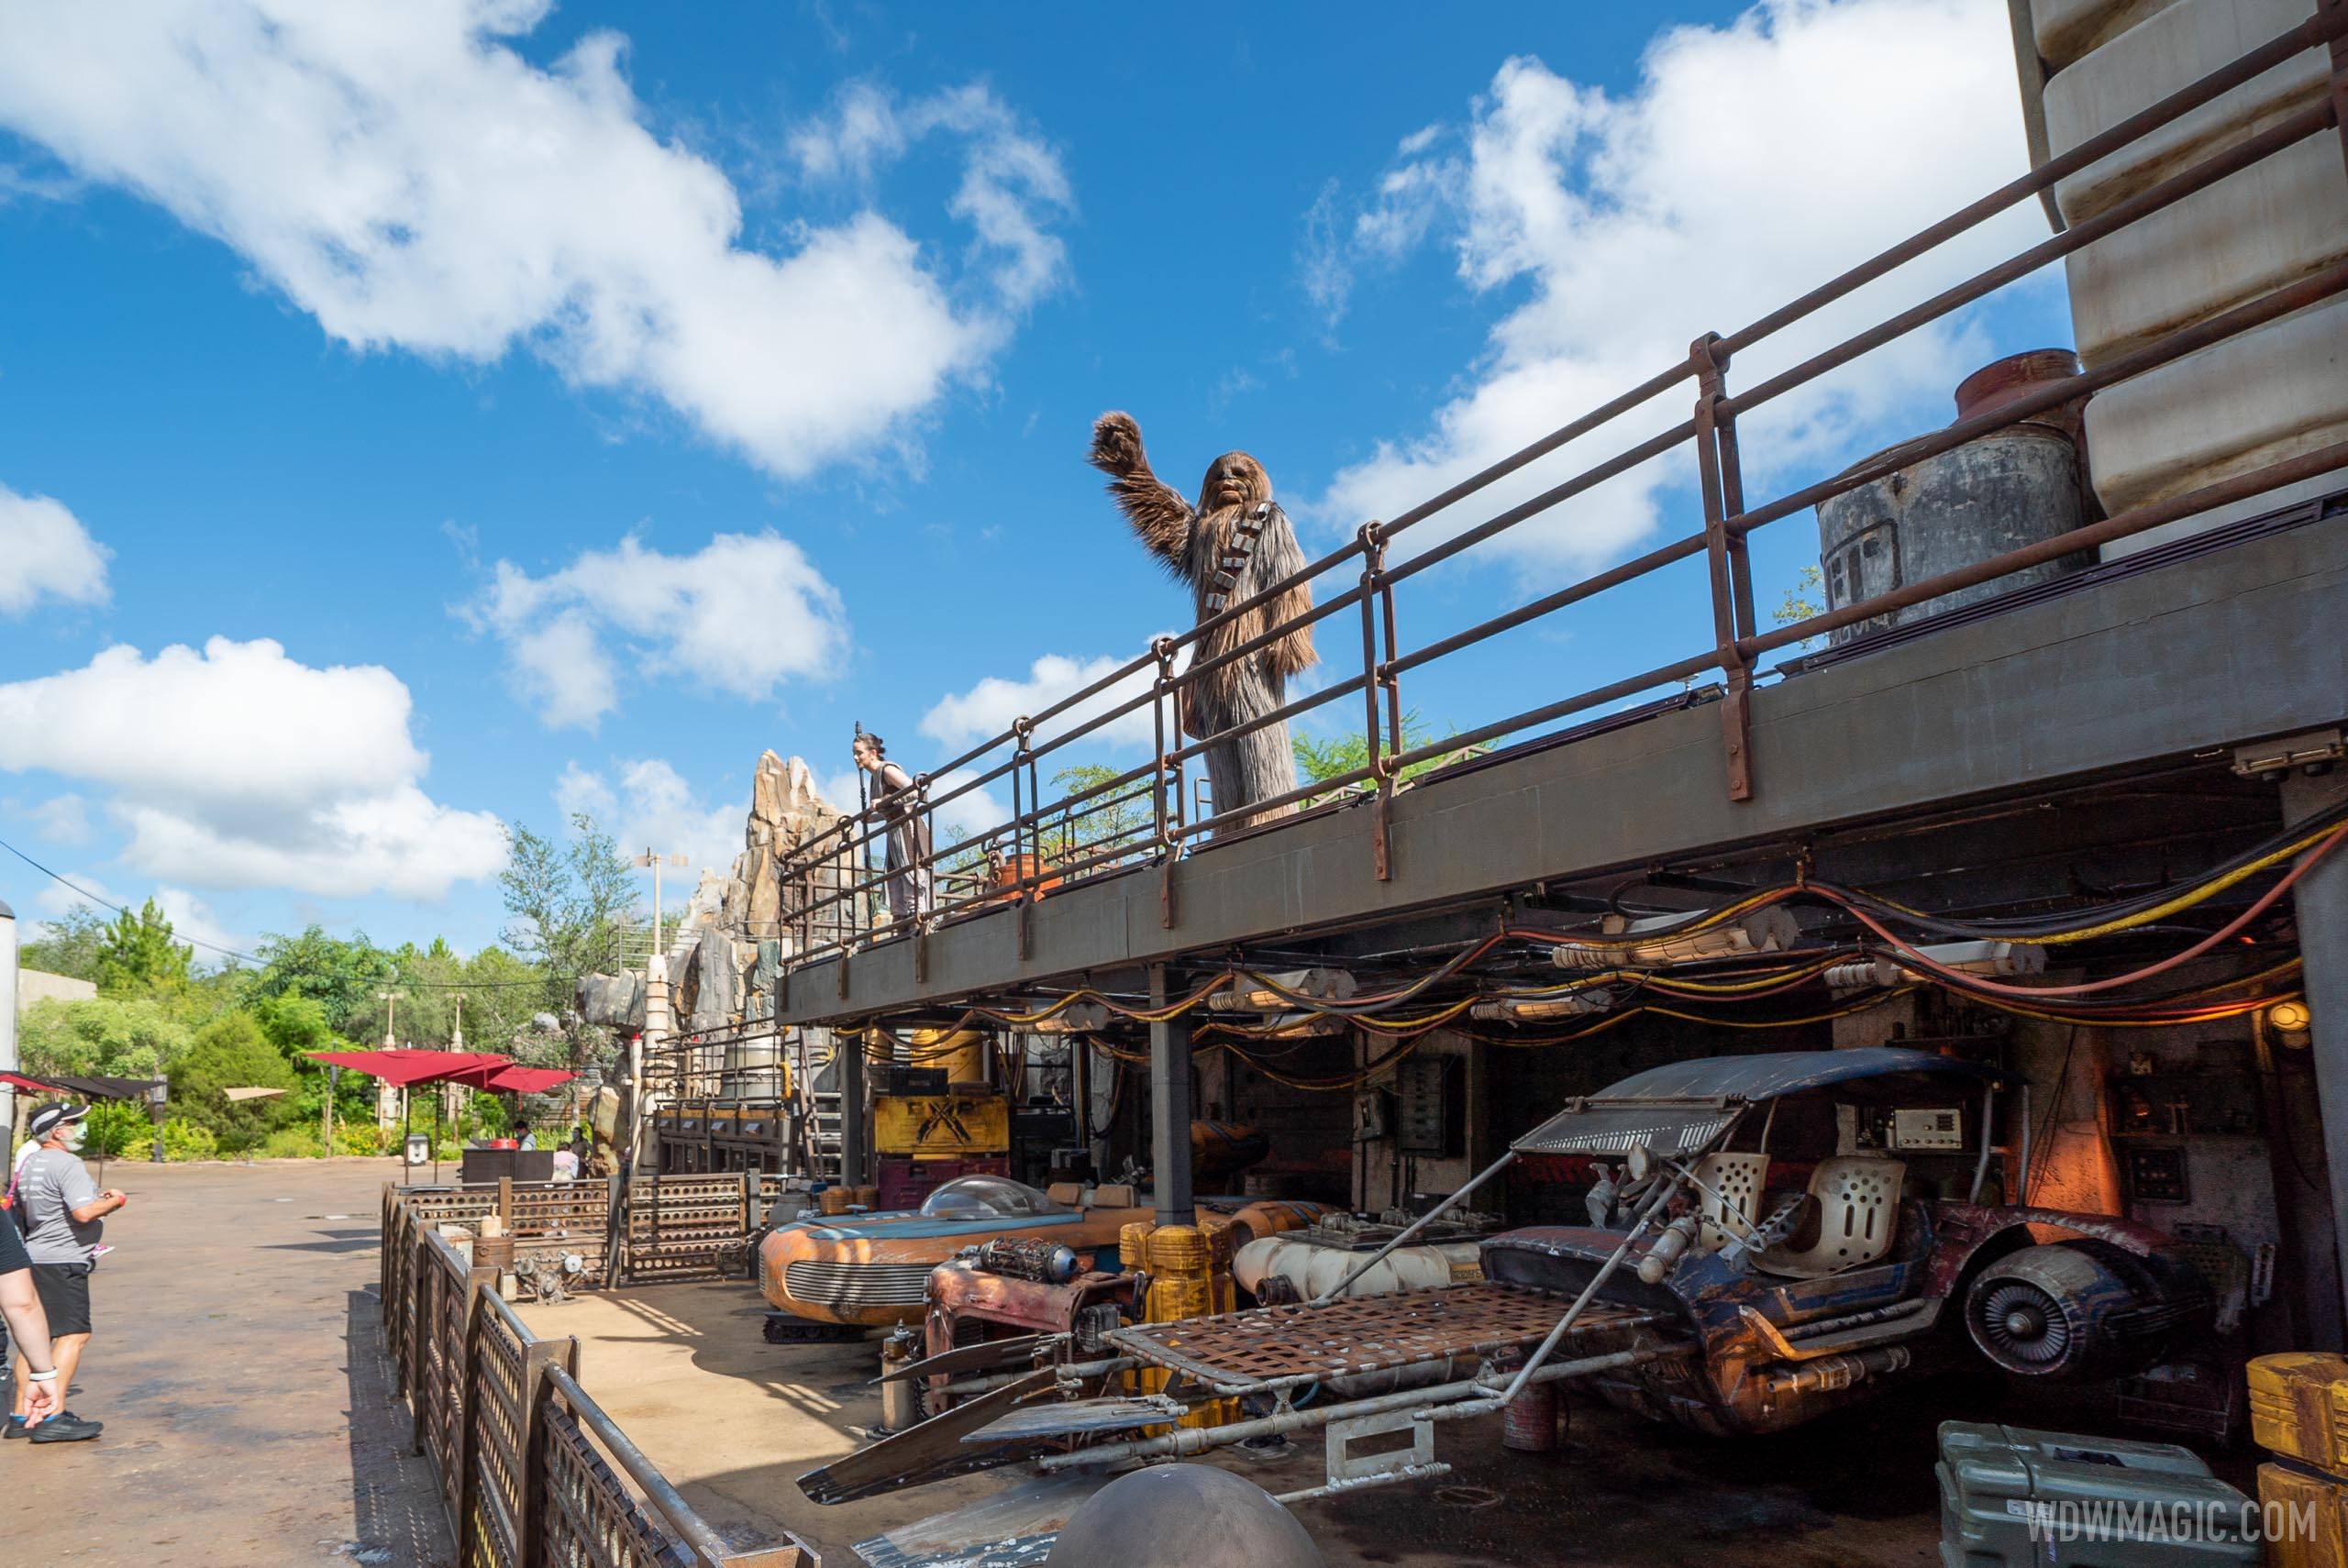 Chewbacca and Rey appear at a distance in Galaxy's Edge